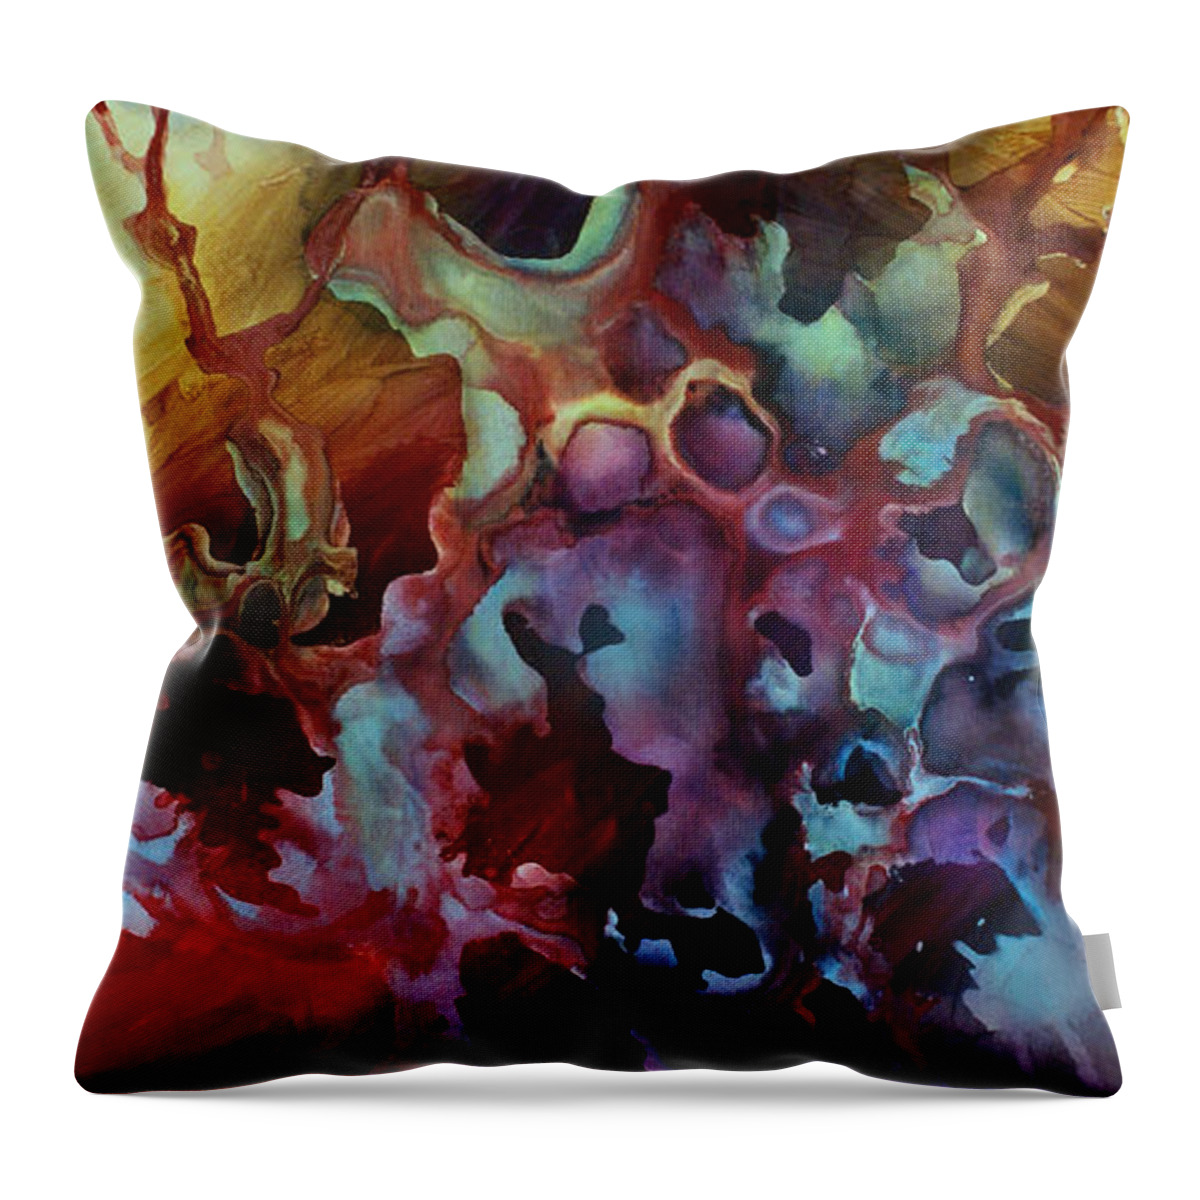 Abstract Painting Art Modern Art Deco Floral Colorful Red Blue Yellow Earth Tones Garden Expressionism Natural Minimalism Free Flow Liquid Fluid Throw Pillow featuring the painting Evolution by Michael Lang